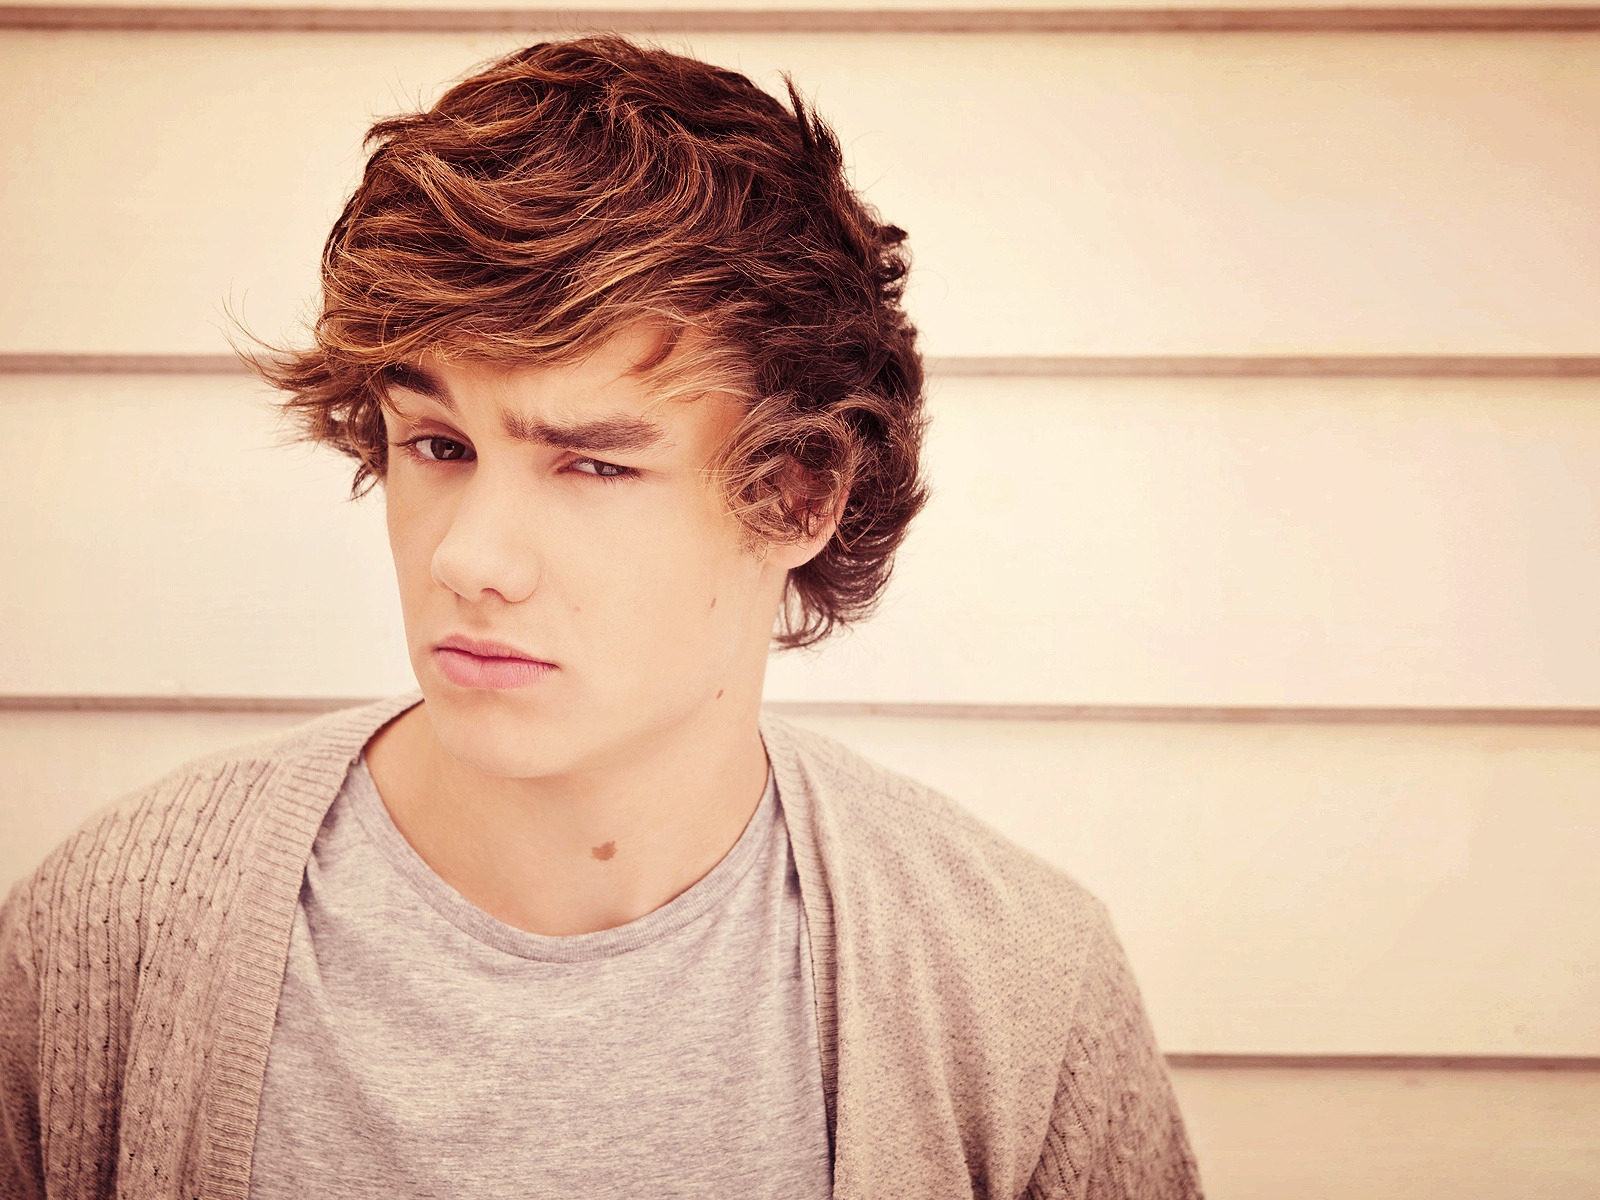 Liam Payne Look for 1600 x 1200 resolution